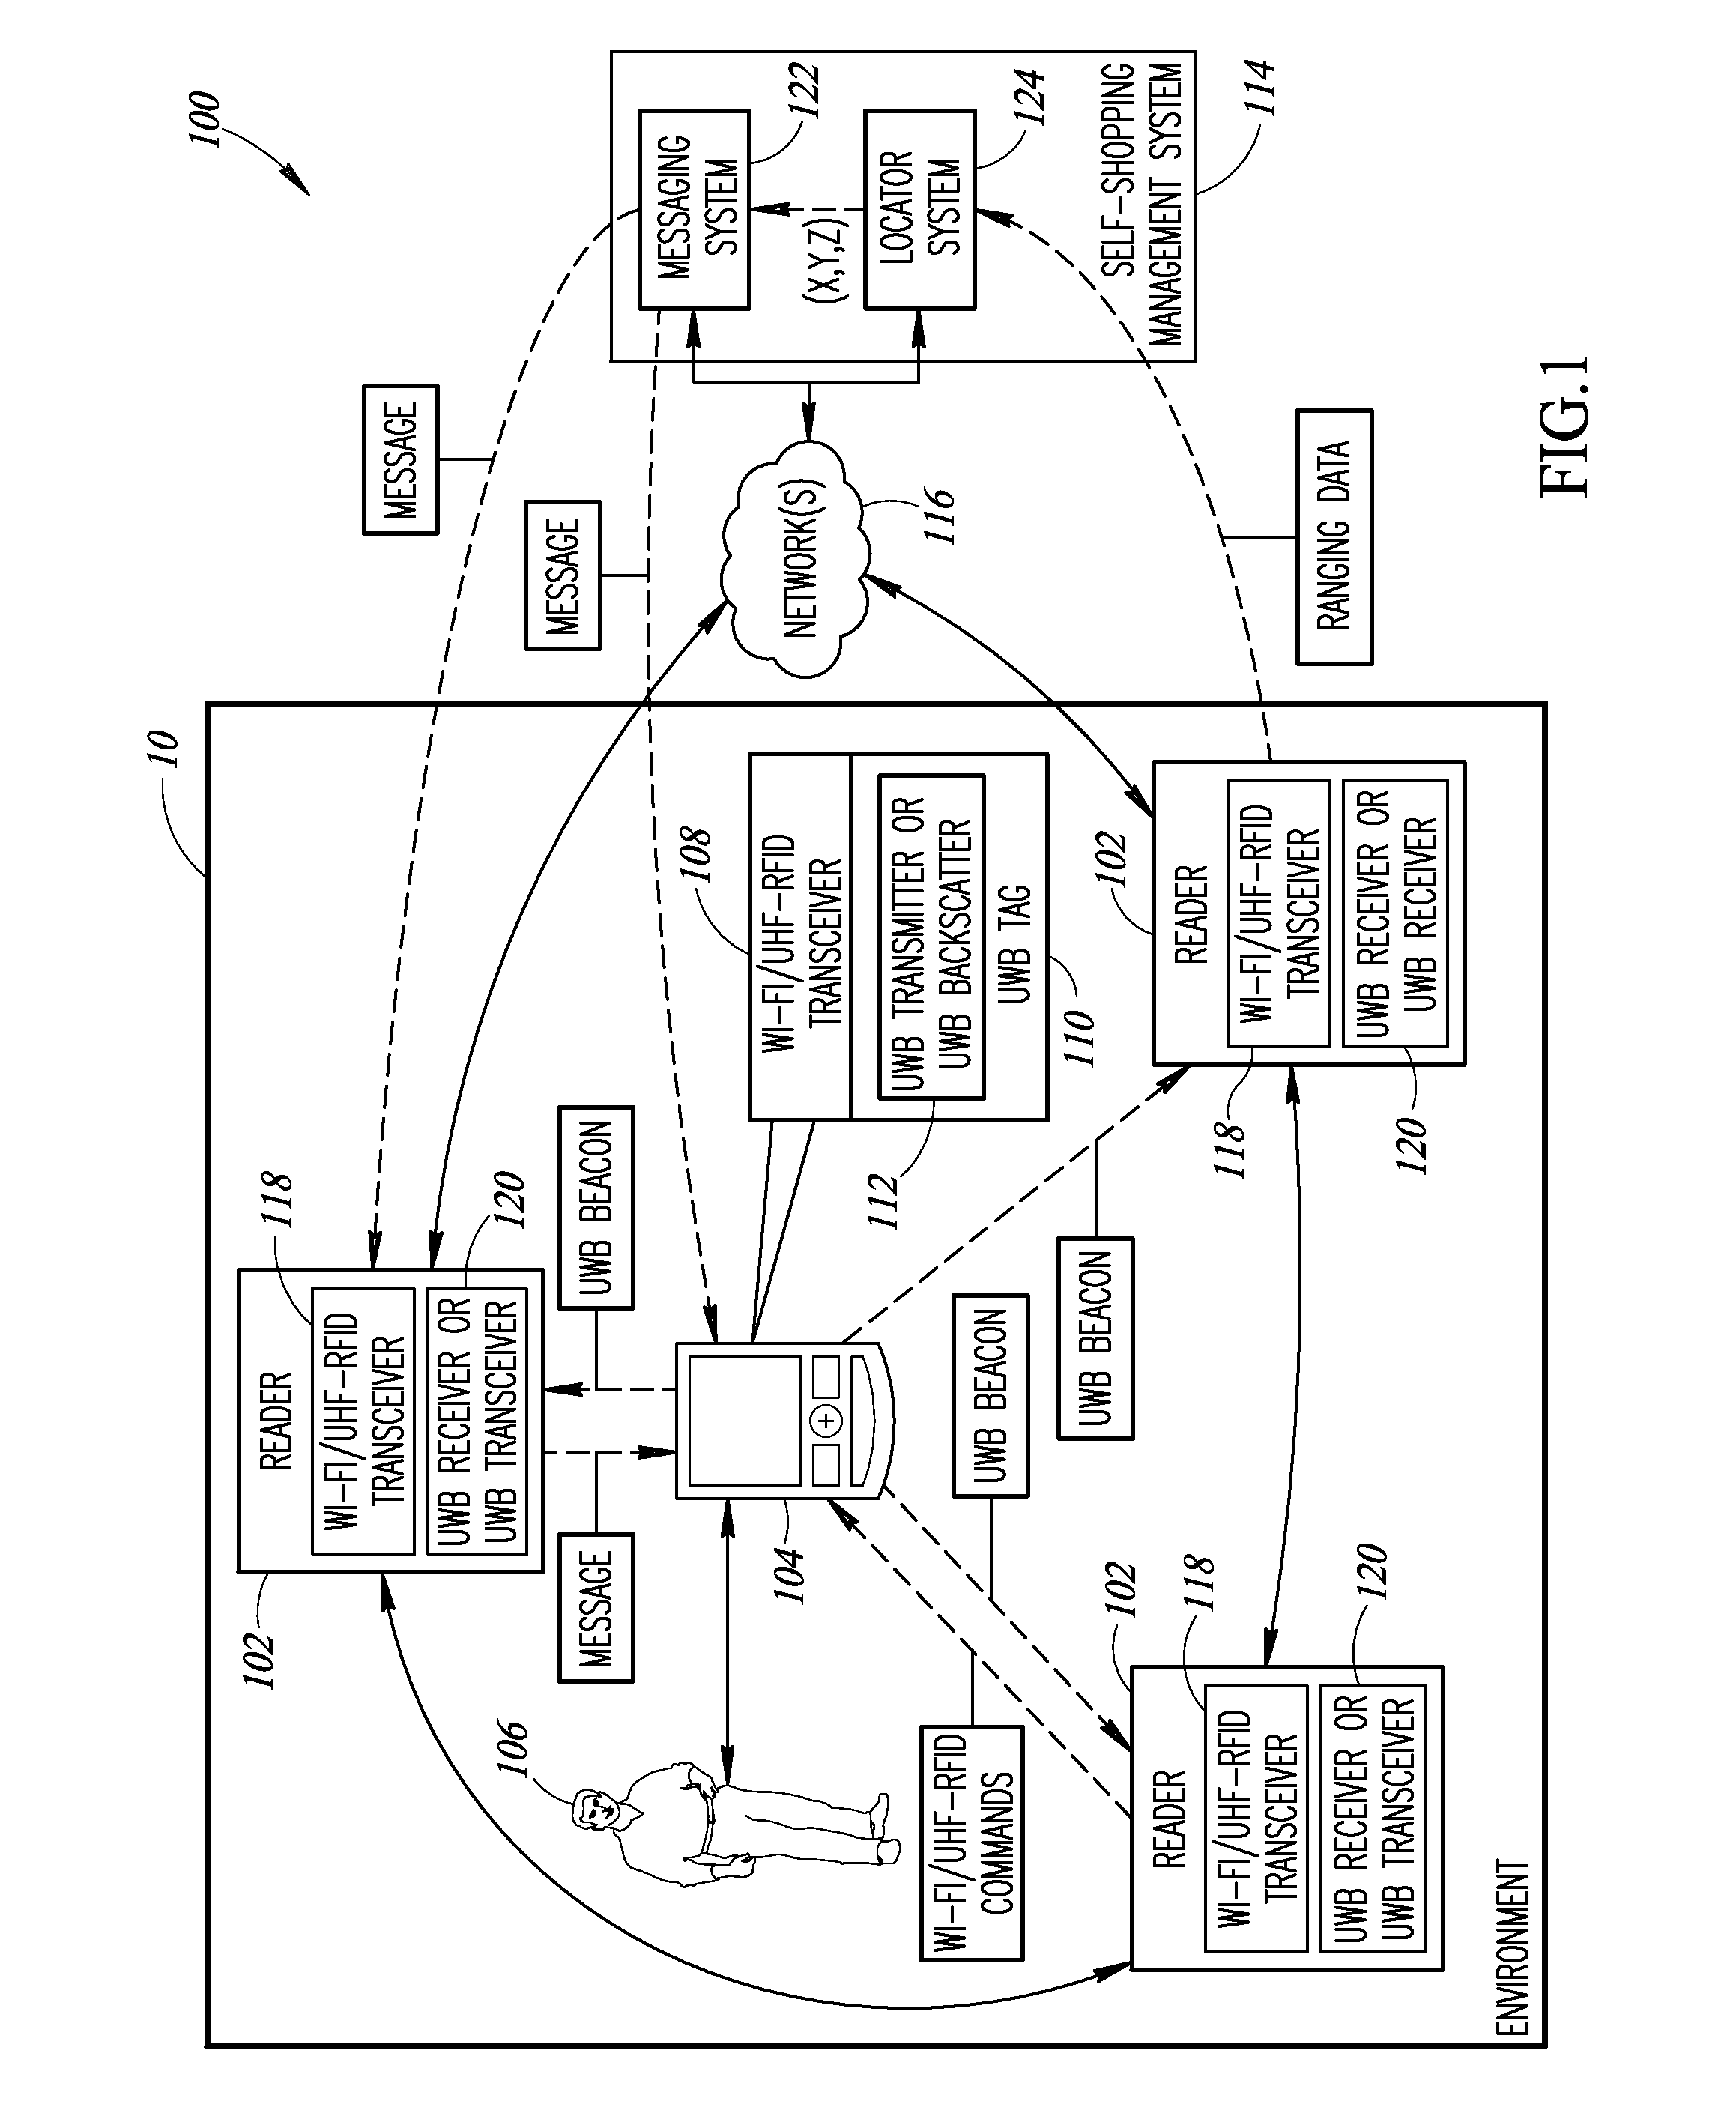 Ultra-wideband location engine for self-shopping devices